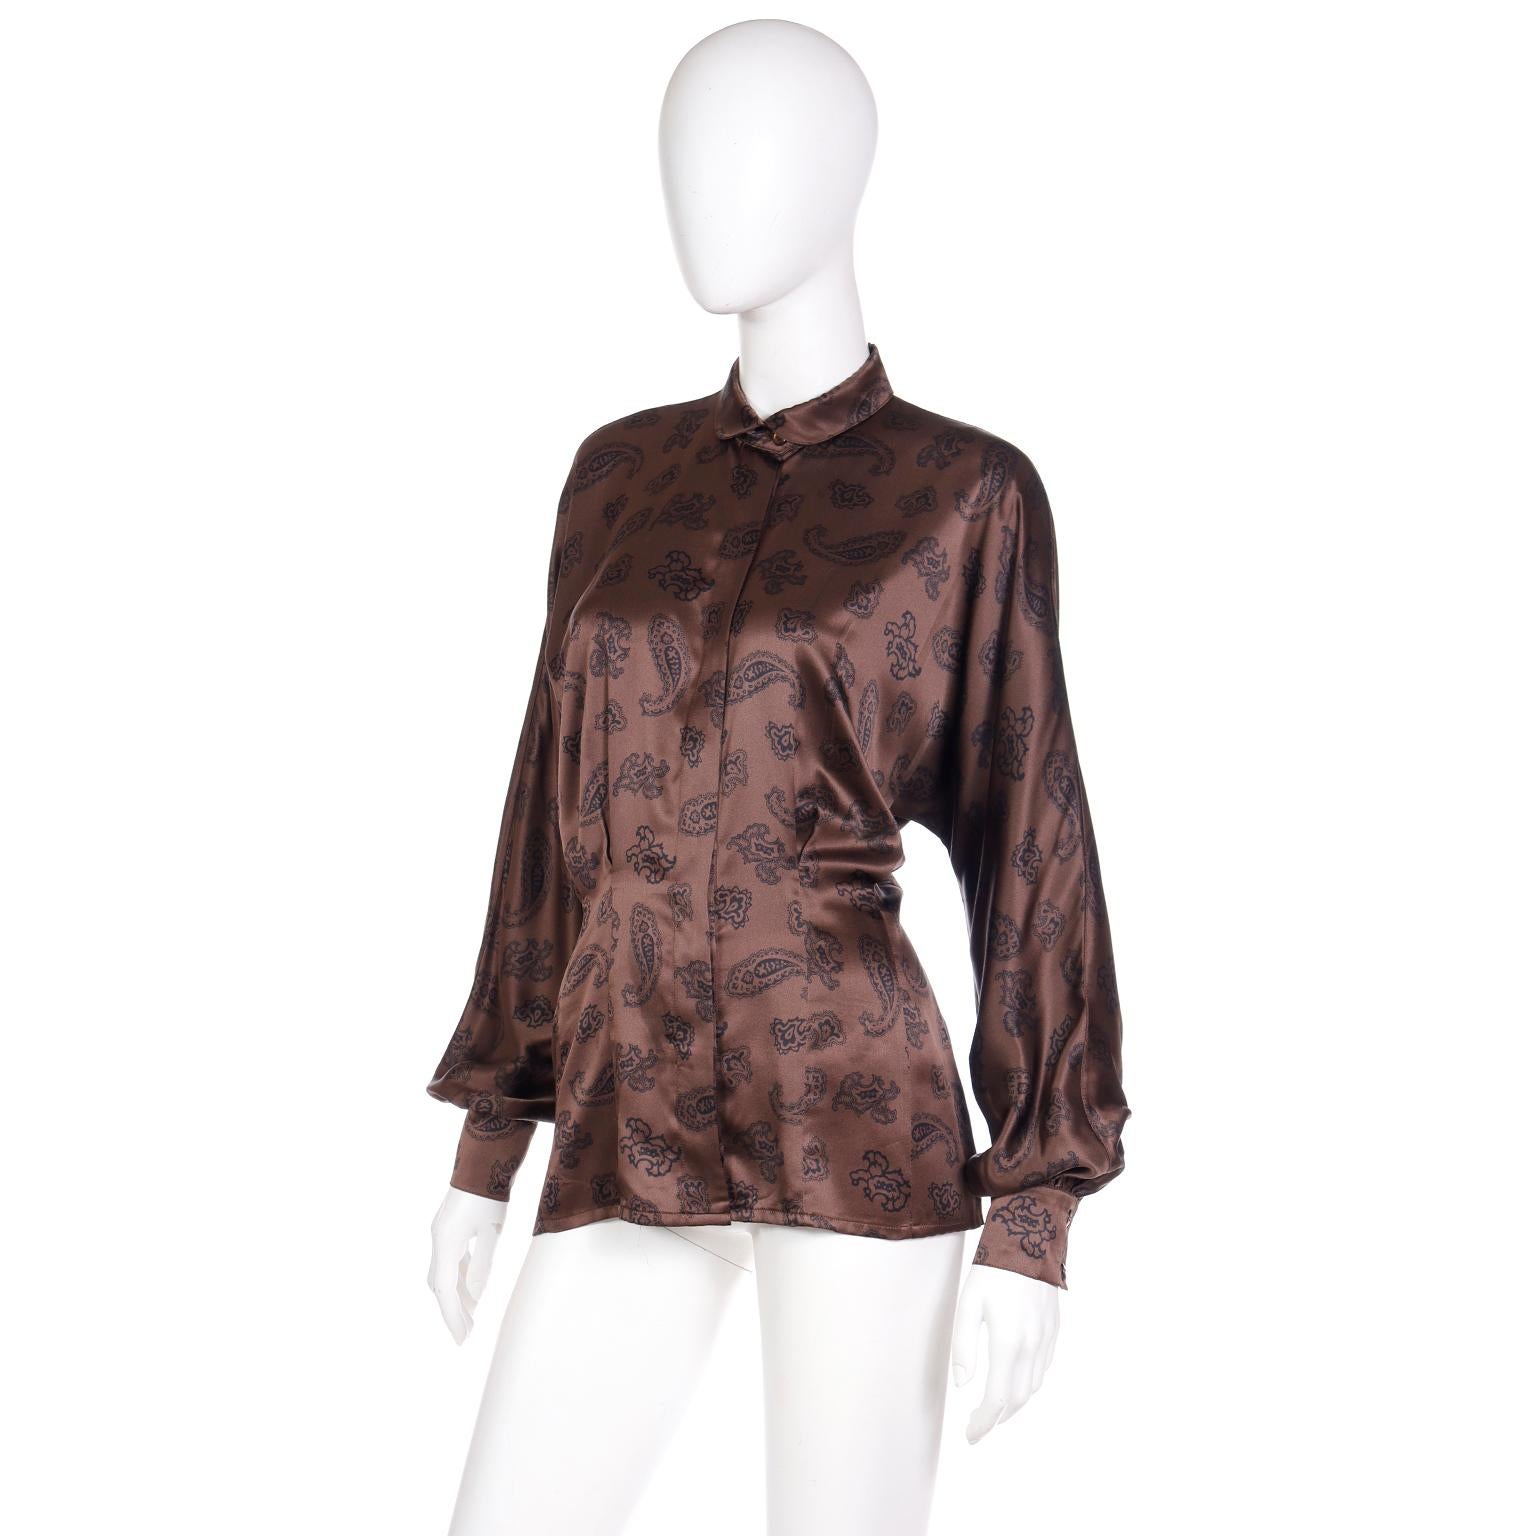 We are passionate about vintage Escada by Margaretha Ley pieces, especially her prints and silk blouses! This beautiful blouse is in a brown and black paisley print with bishop sleeves and a peter pan collar. This lovely 1980's top has darts and